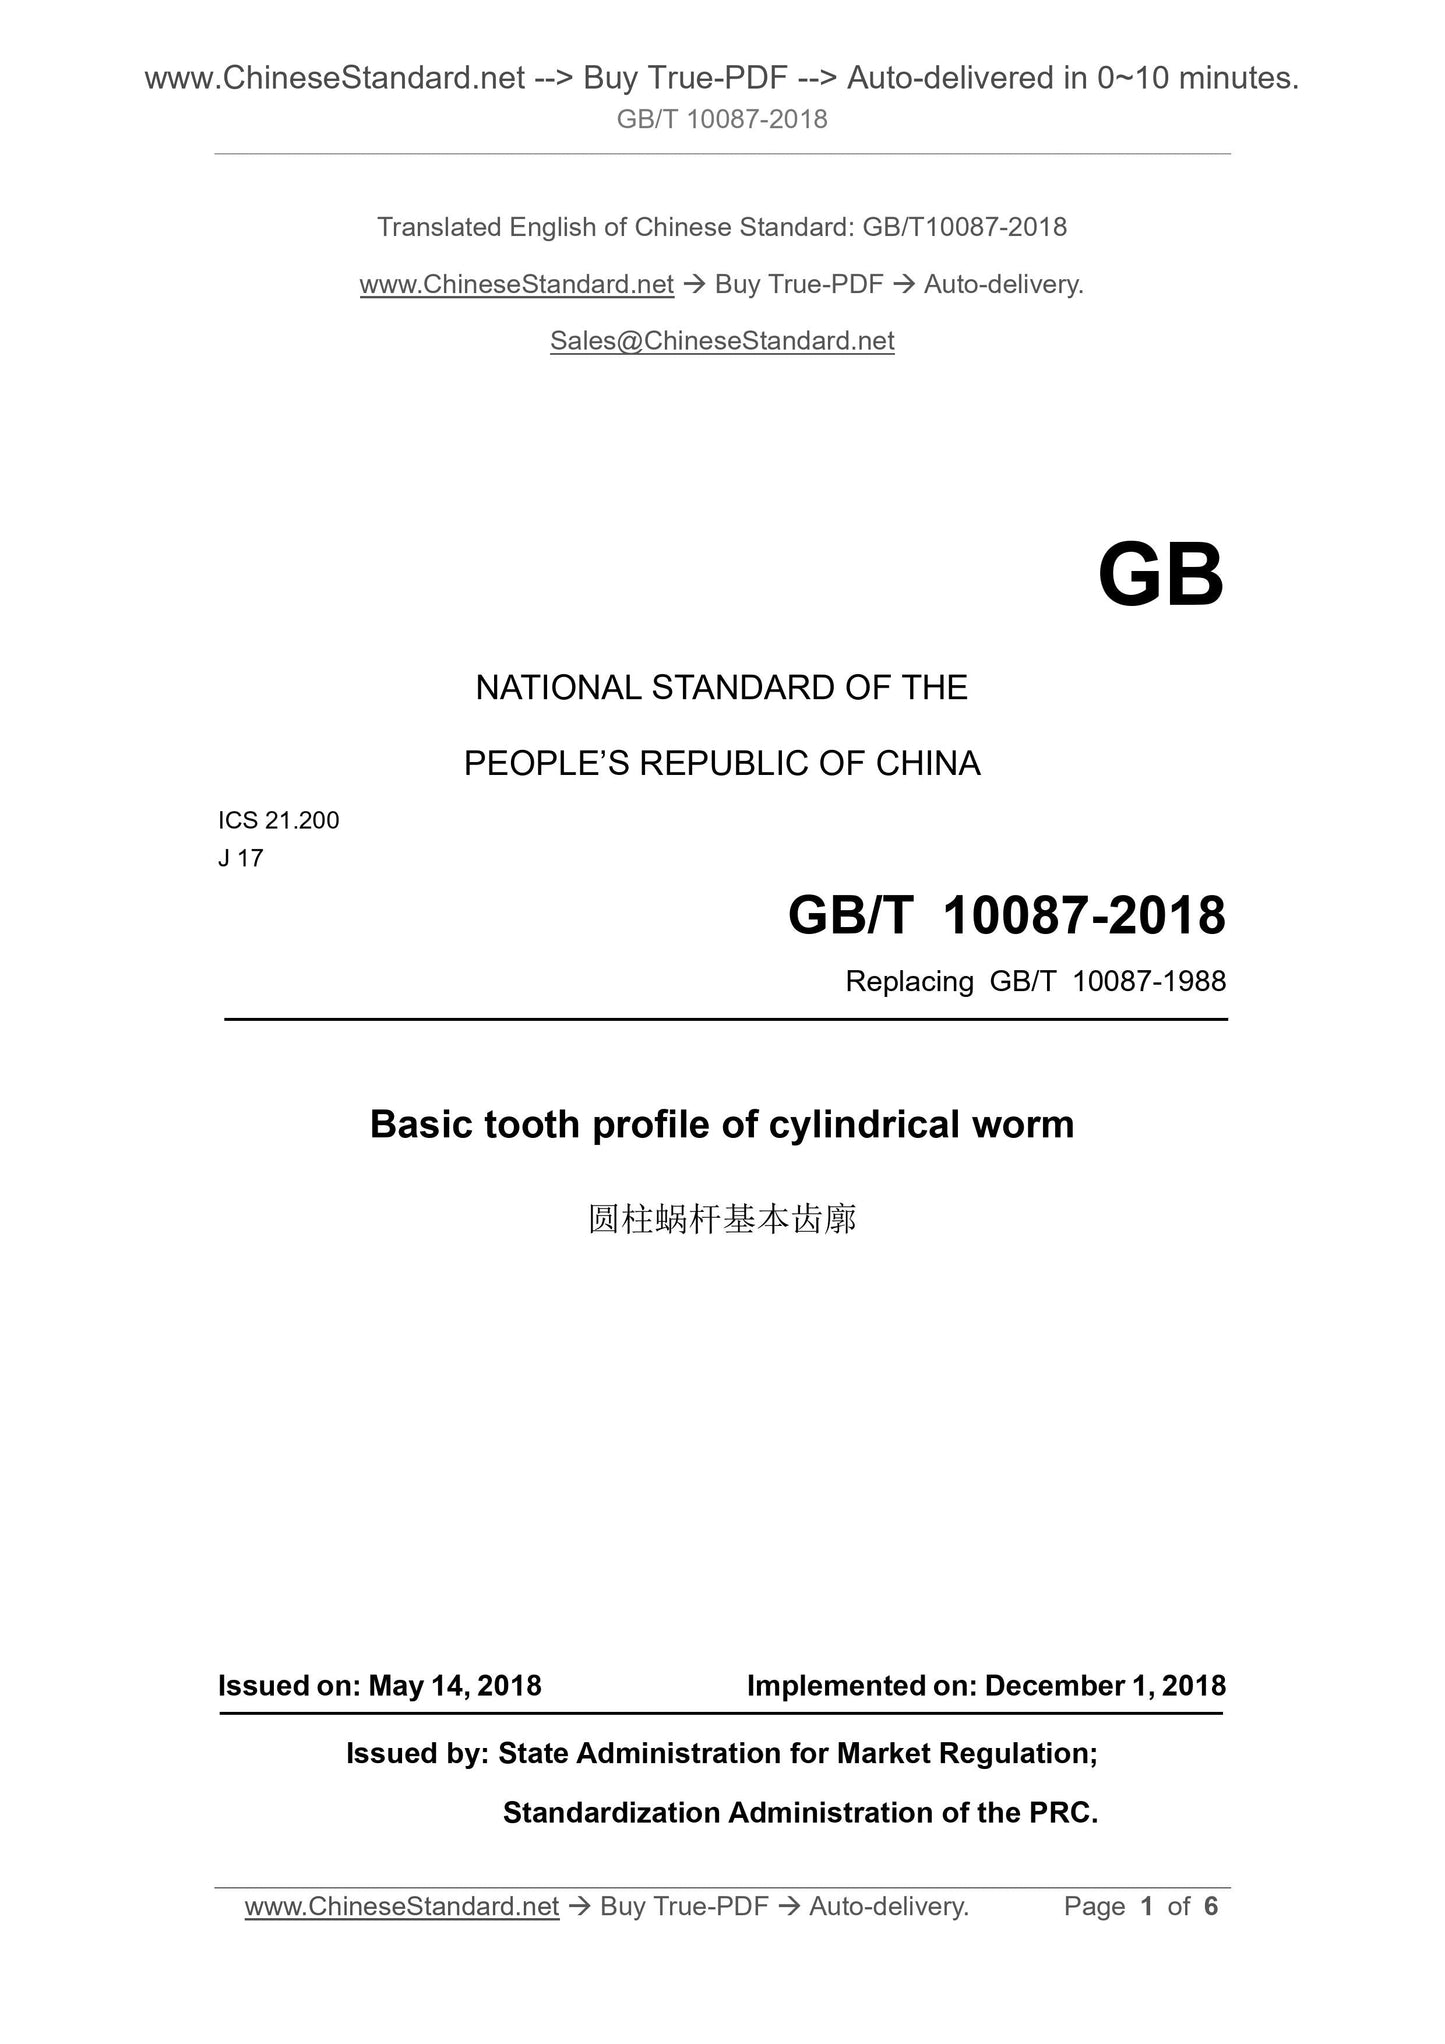 GB/T 10087-2018 Page 1